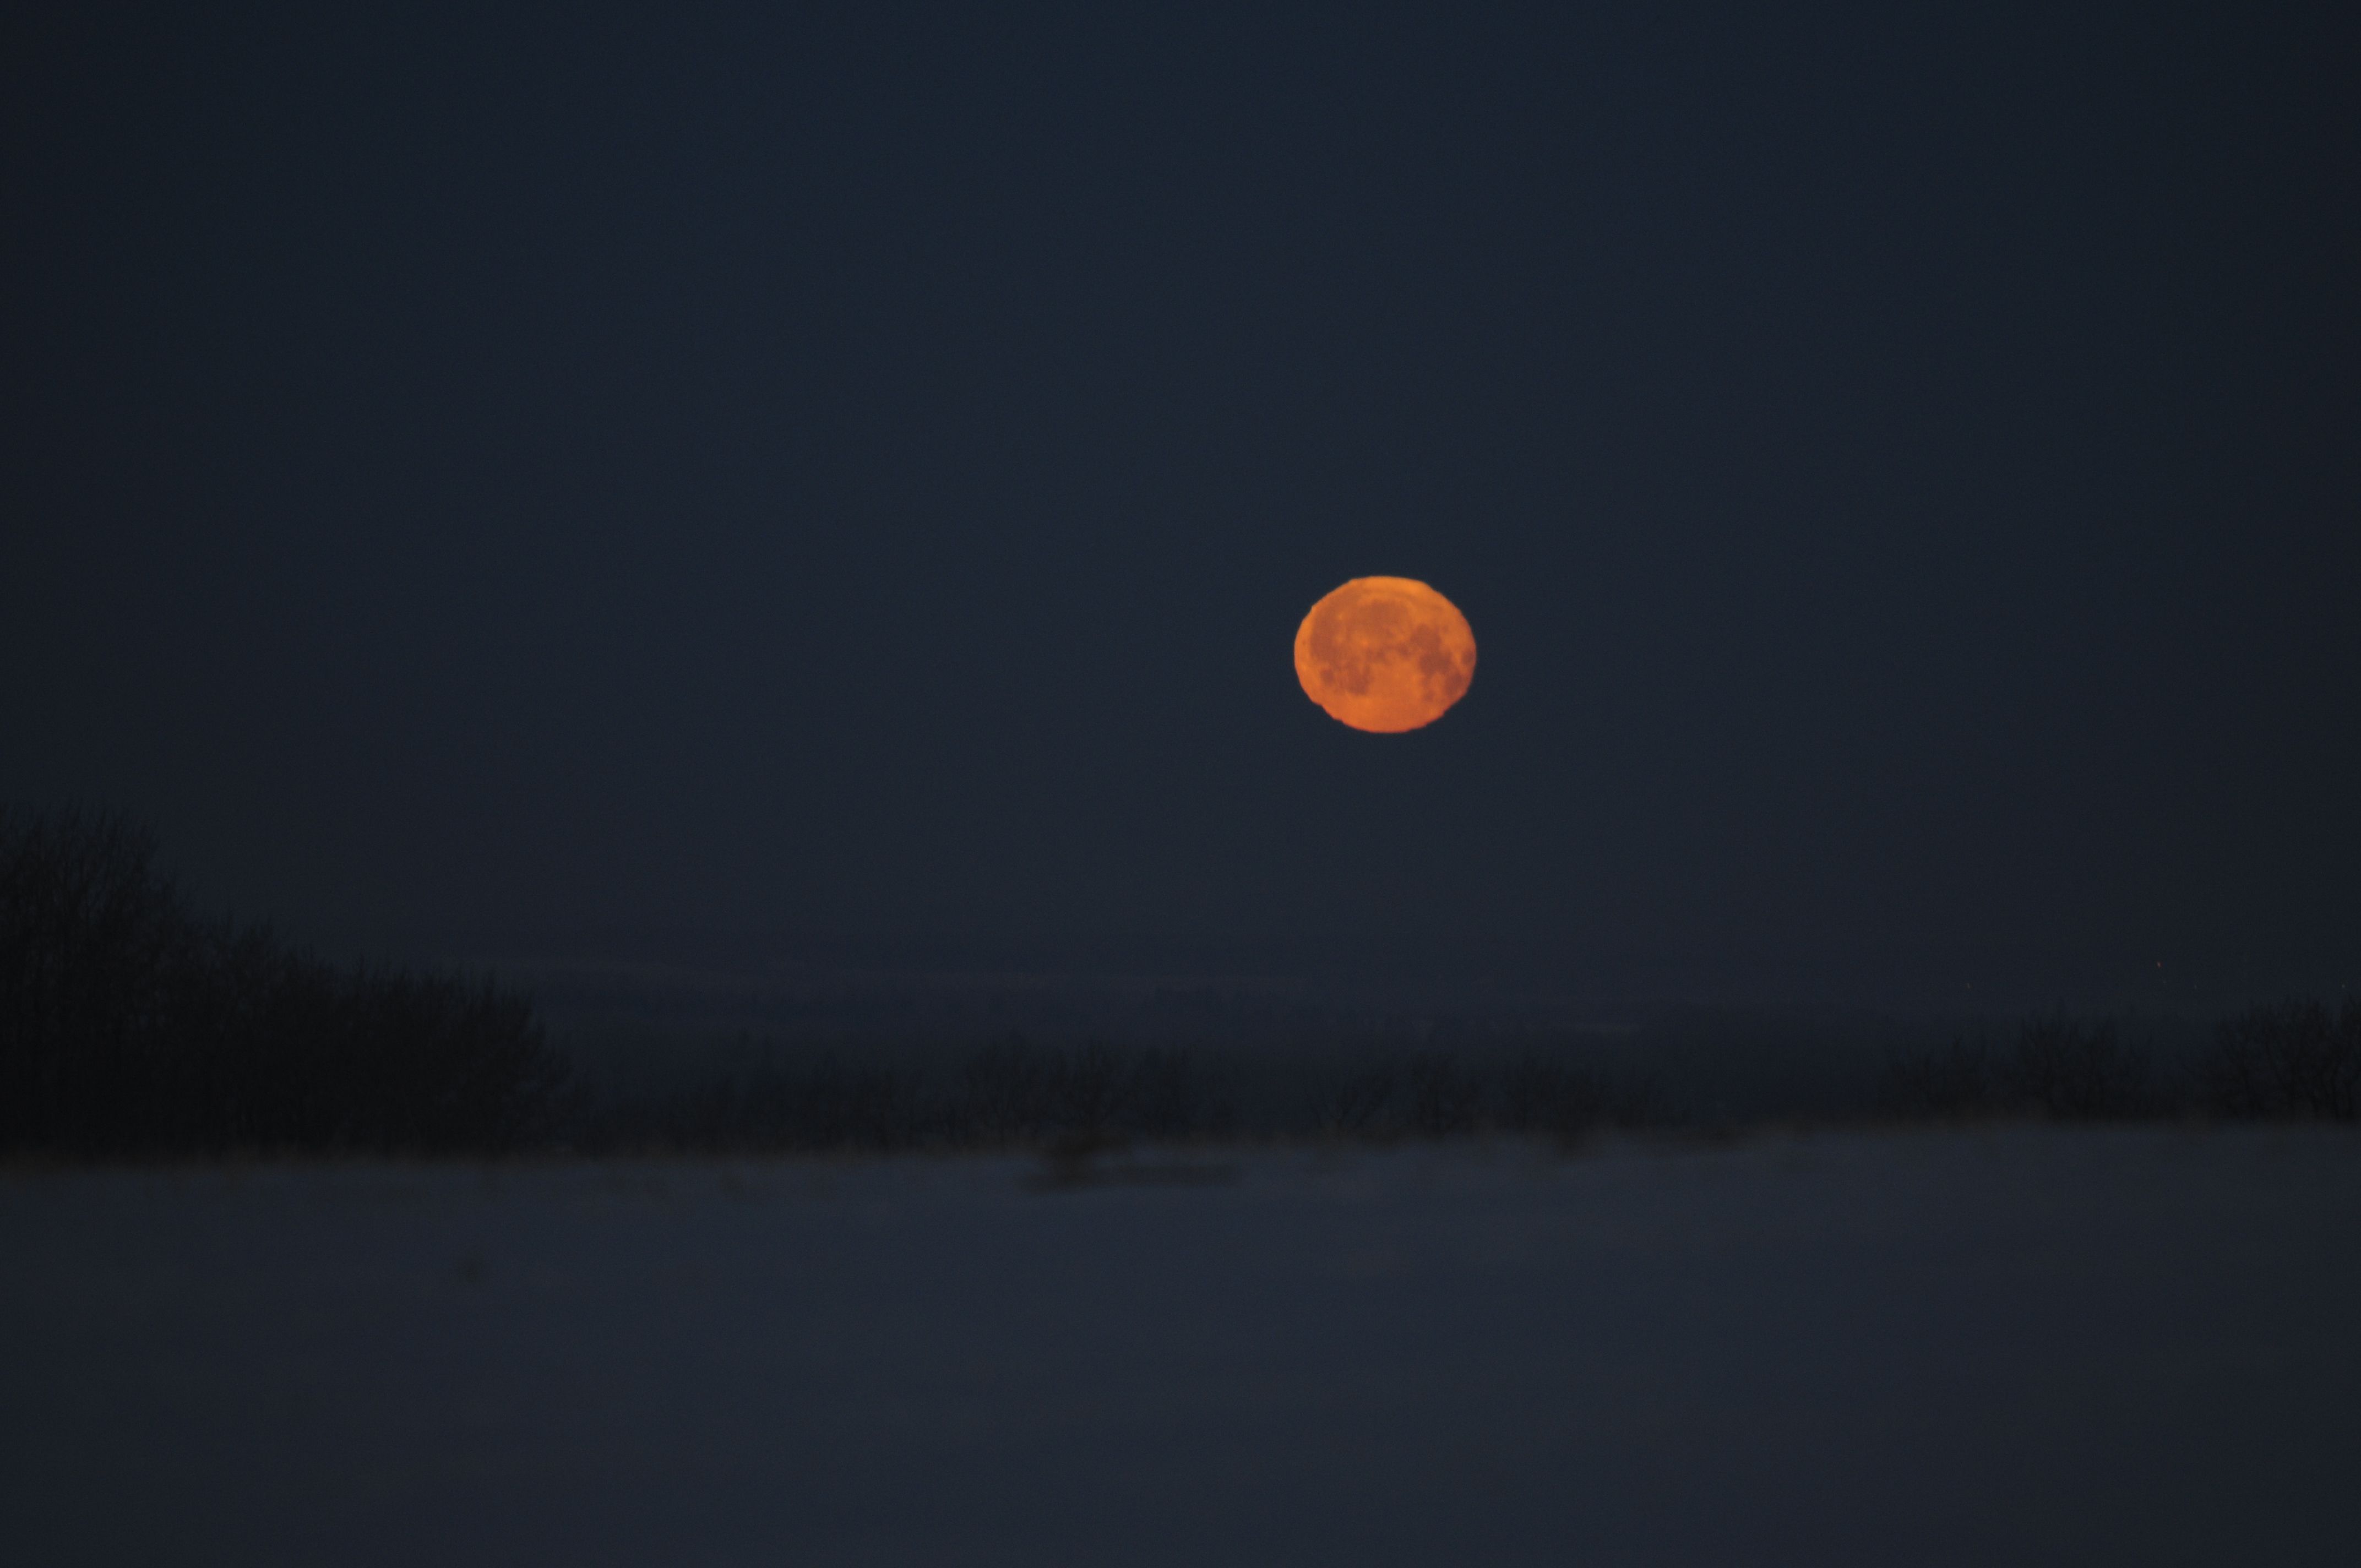 BRIGHT- The moon sunk low in the sky as the sun gave it a glowing appearance recently on a country road west of Red Deer.